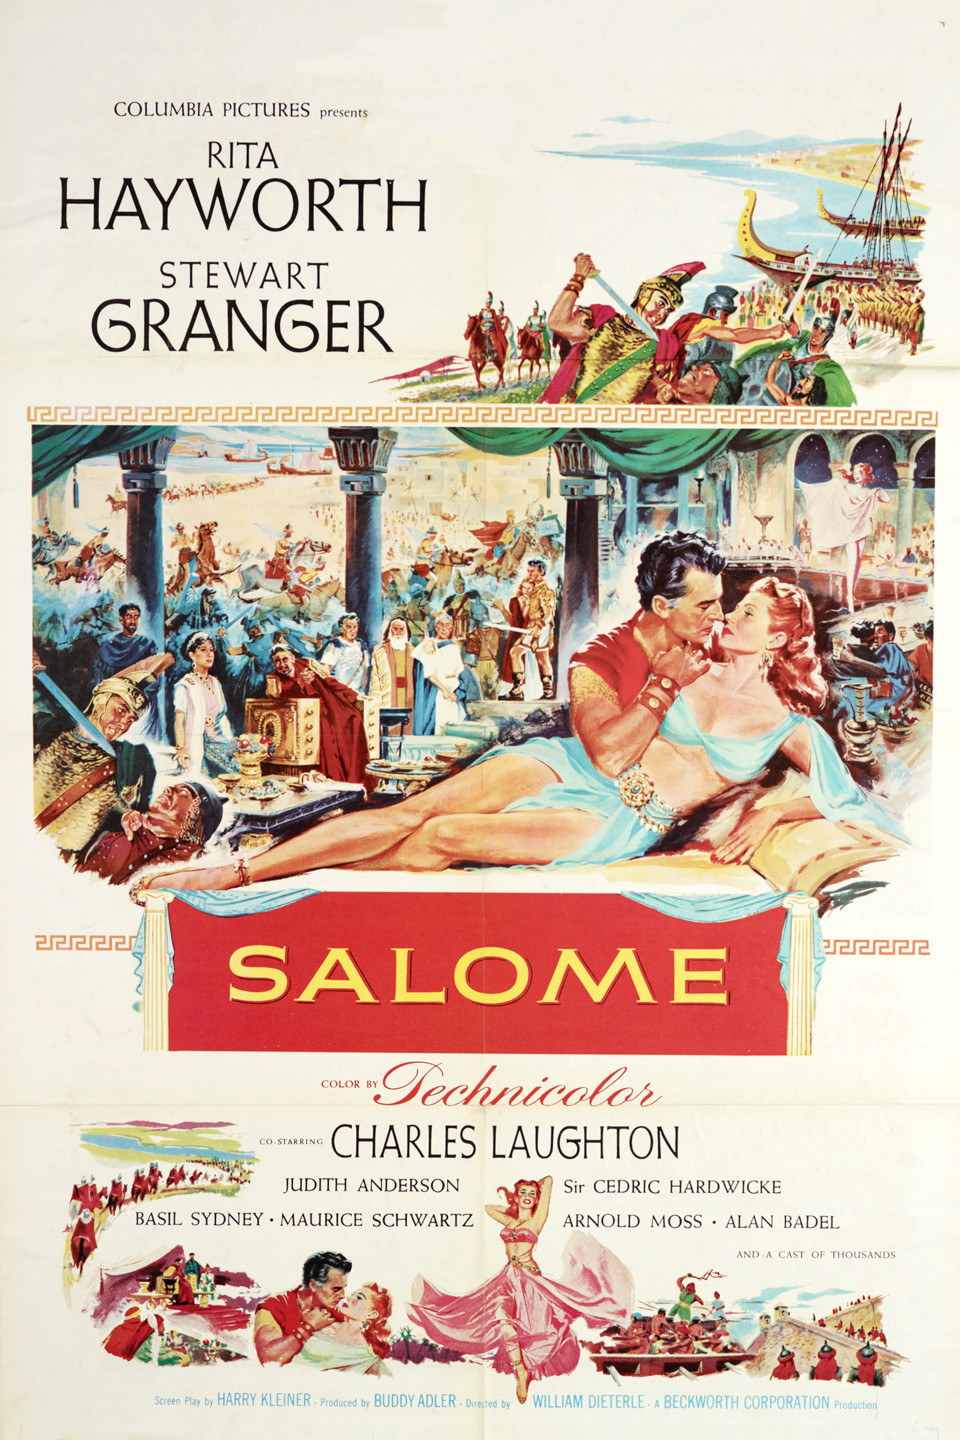 Poster for the movie "Salome"